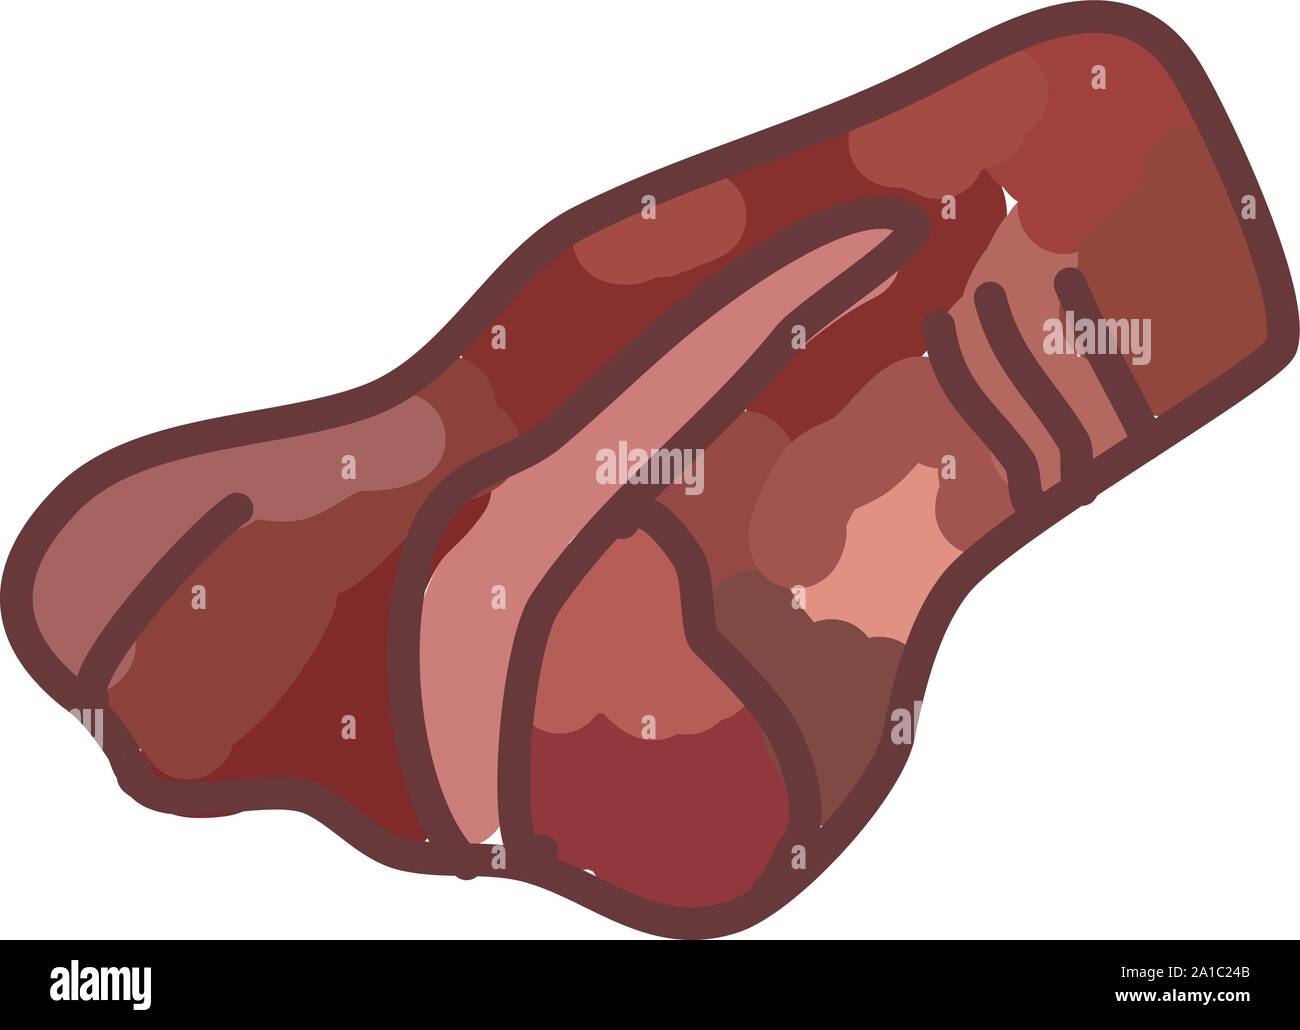 Roast beef illustration Cut Out Stock Images & Pictures - Page 3 - Alamy